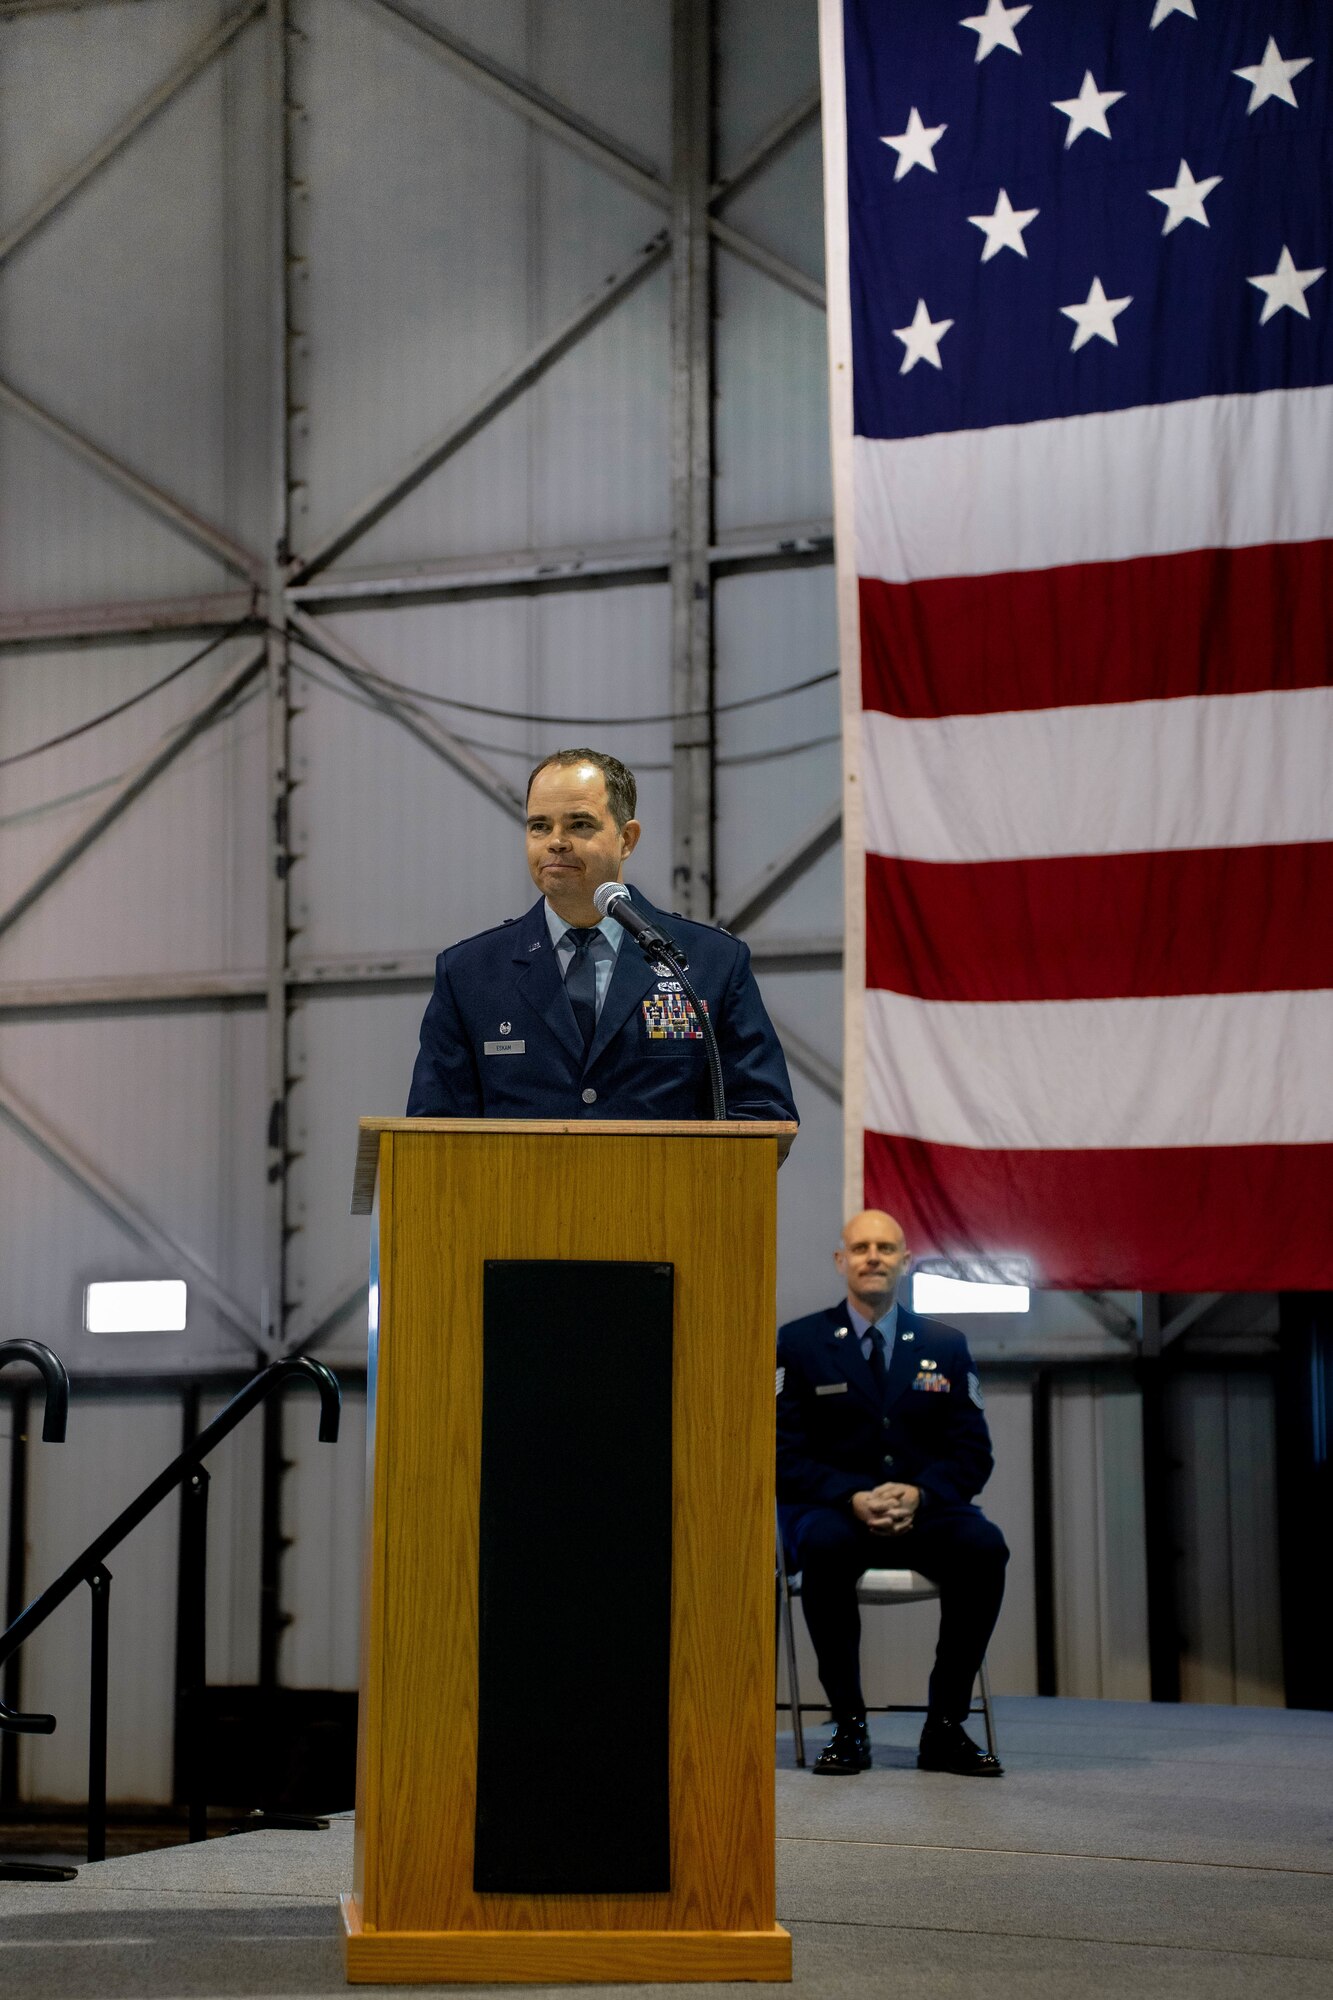 U.S. Air Force Col. Brandon Eskam, 114th Fighter Wing commander, provides remarks after assuming command from Col. Mark Morrell, 114th Fighter Wing outgoing commander (far right), during the 114th FW Change of Command ceremony, Jan. 8, 2023, Joe Foss Field, South Dakota.